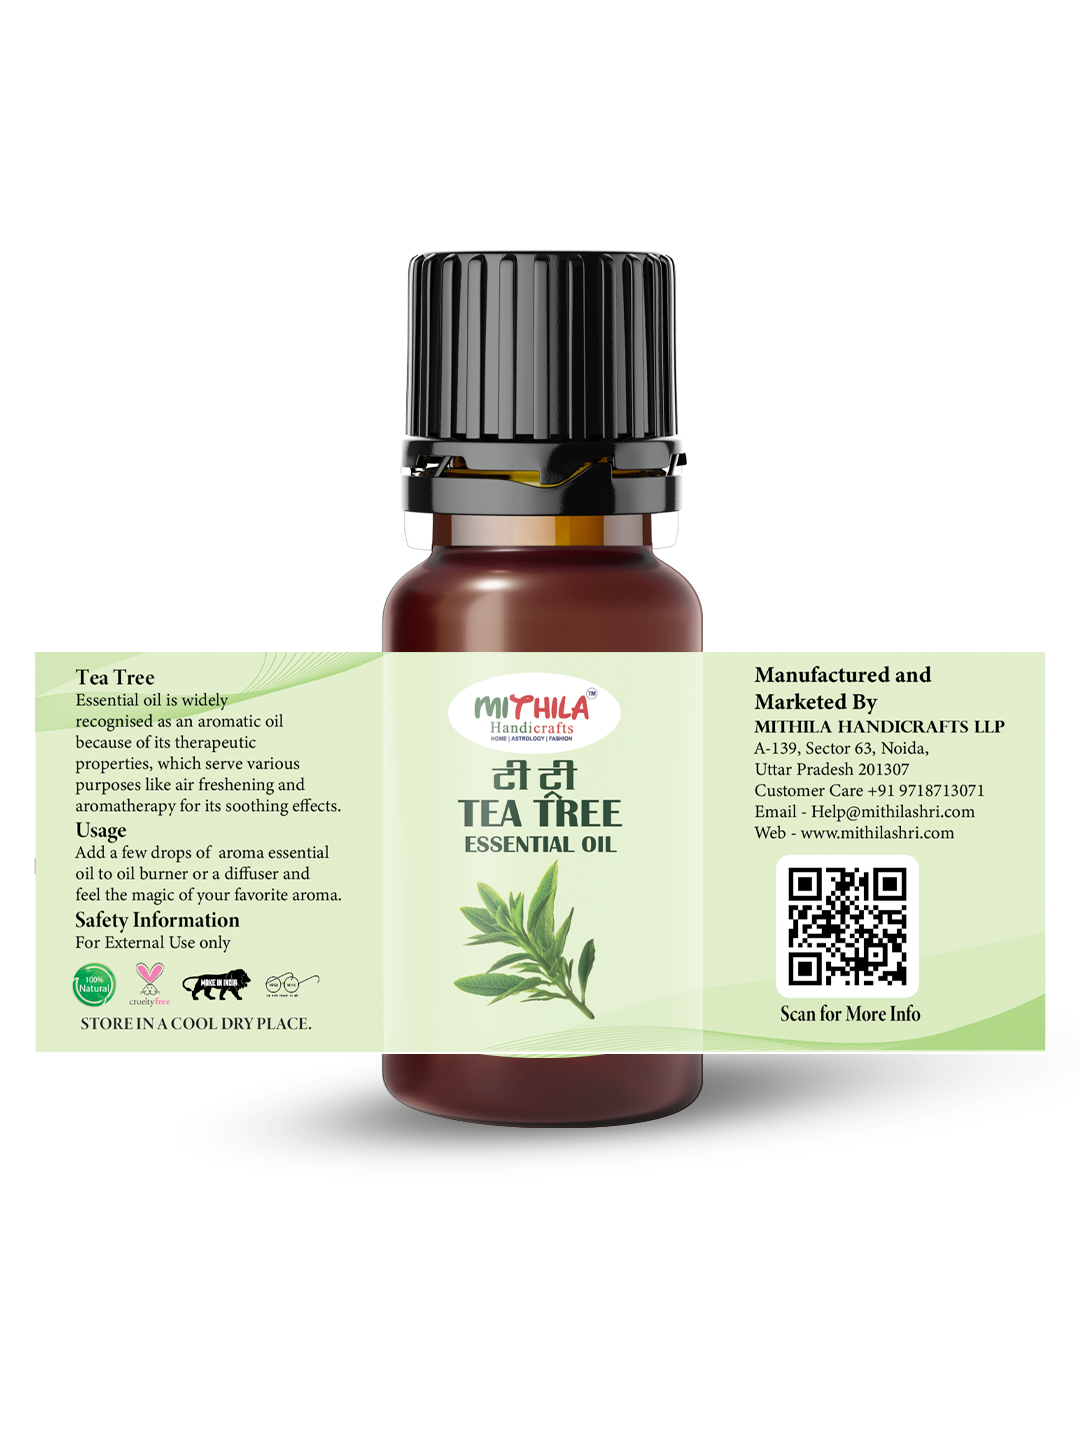 Tea Tree Essential Oil For Skin, Hair Care, Home Fragrance, Aroma Therapy 15ml (Pack of 2)